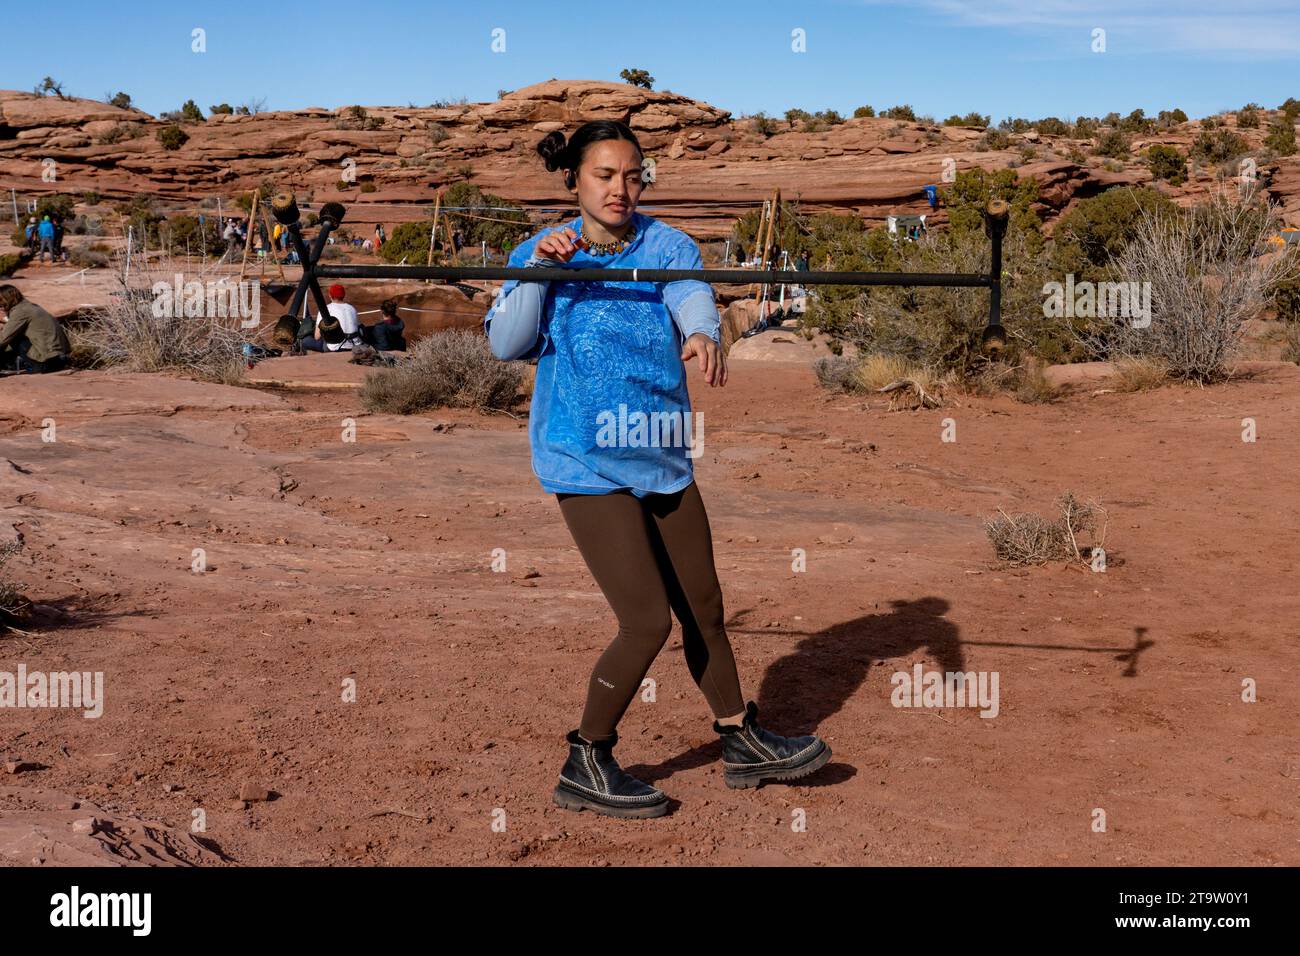 A young woman practices with a fire dragon staff at the GGBY Highlining Festival in Moab,  Utah.  She is rolling the staff down her arm.  Usually perf Stock Photo